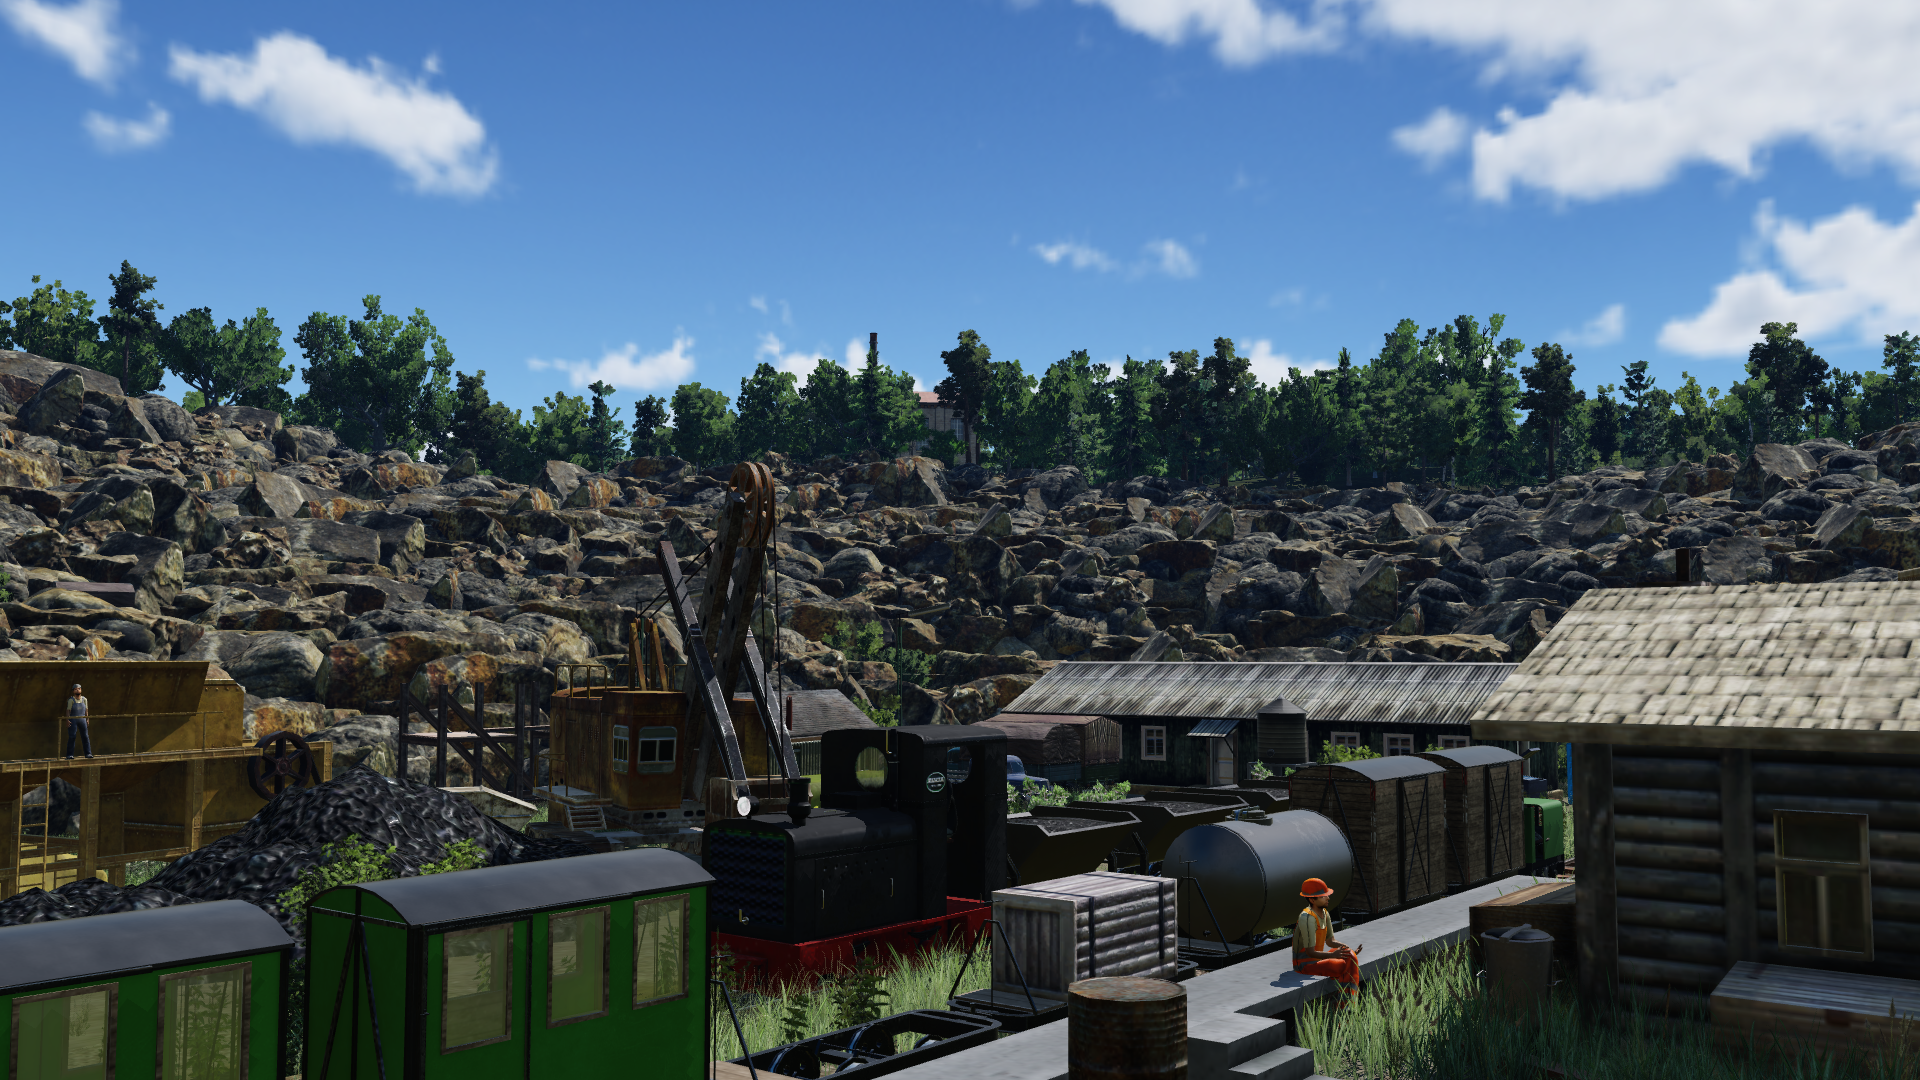 [TpF1] In the old quarry